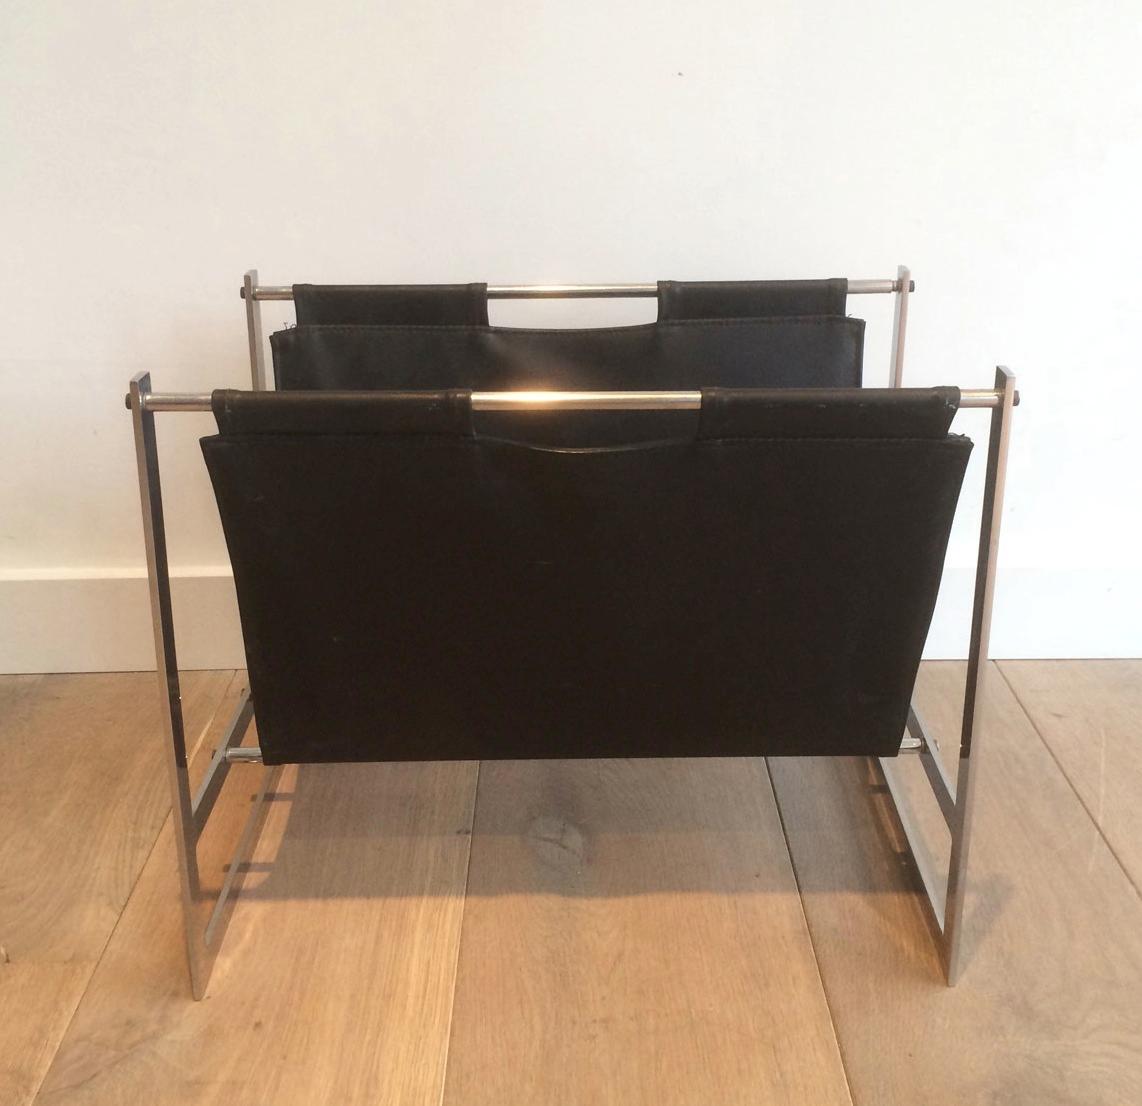 This interesting magazine rack is made of brushed steel and black leather. This is a work in the style of famous Danish designer Poul Kjaerholm, Denmark, circa 1970.